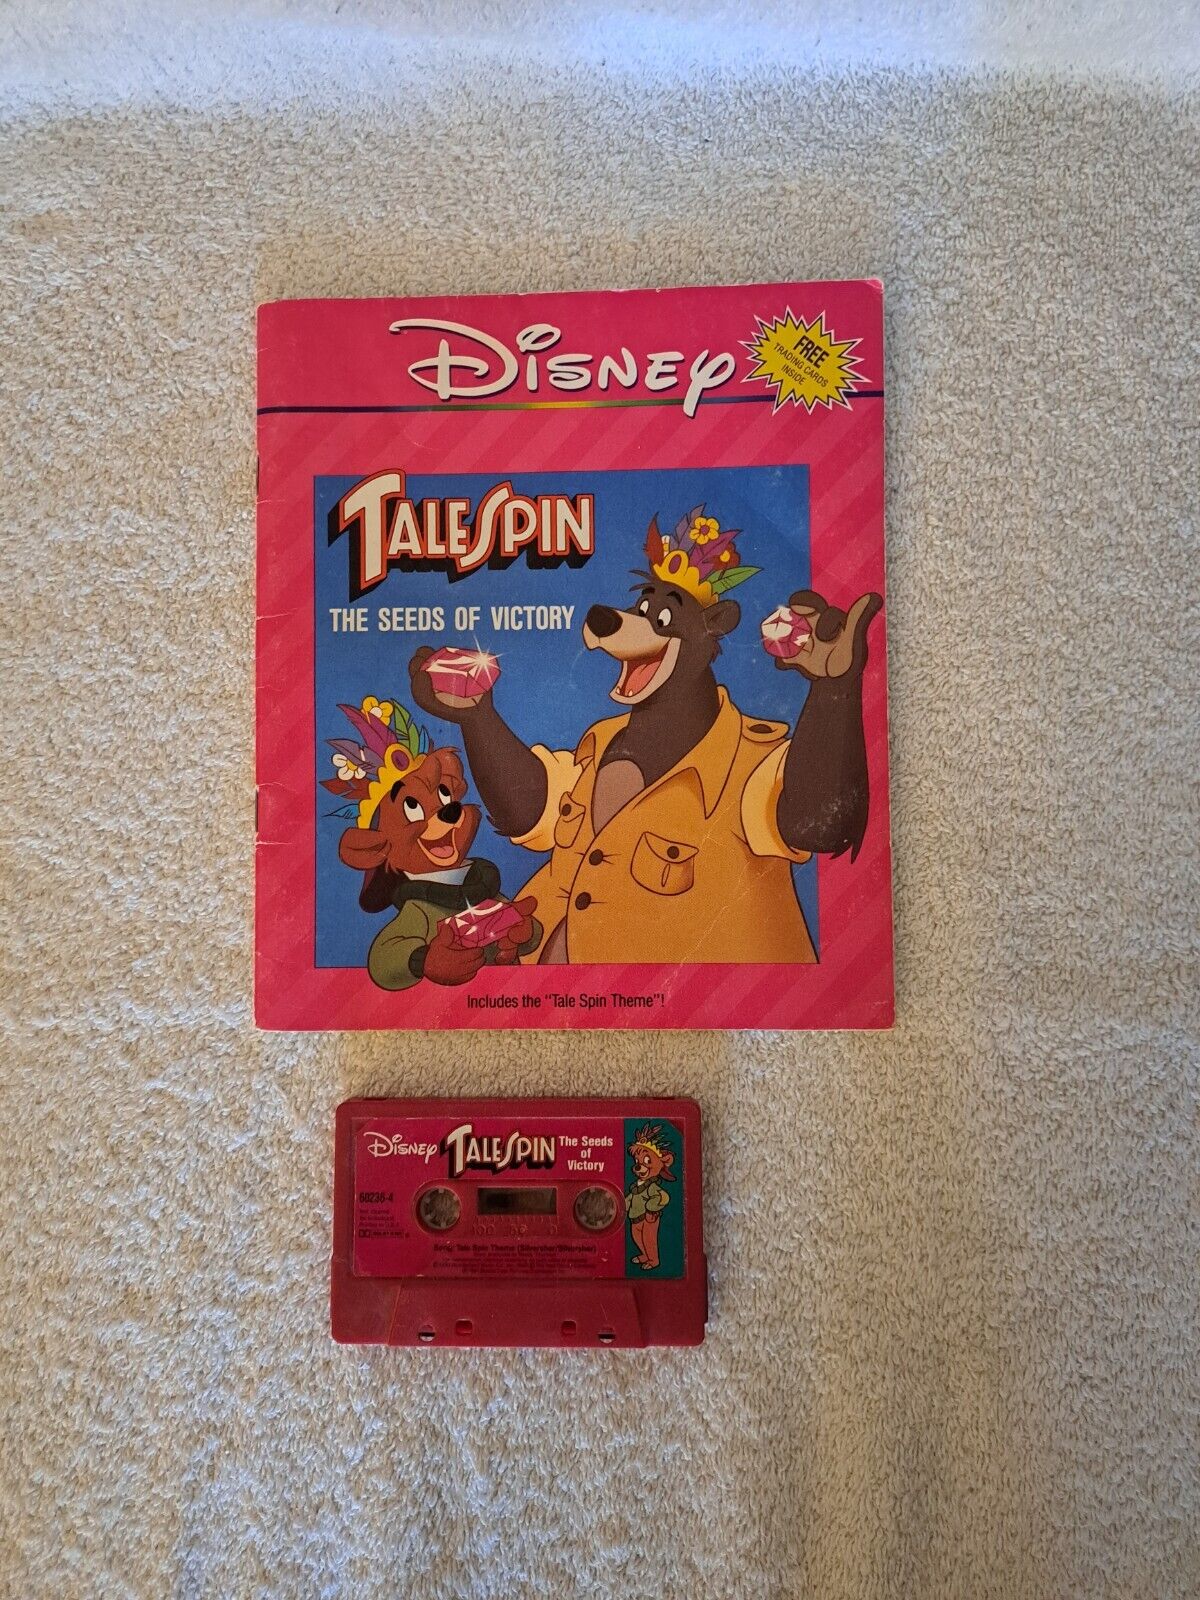 DISNEY Talespin The Seeds of Victory Read Along Book + Cassette Tape